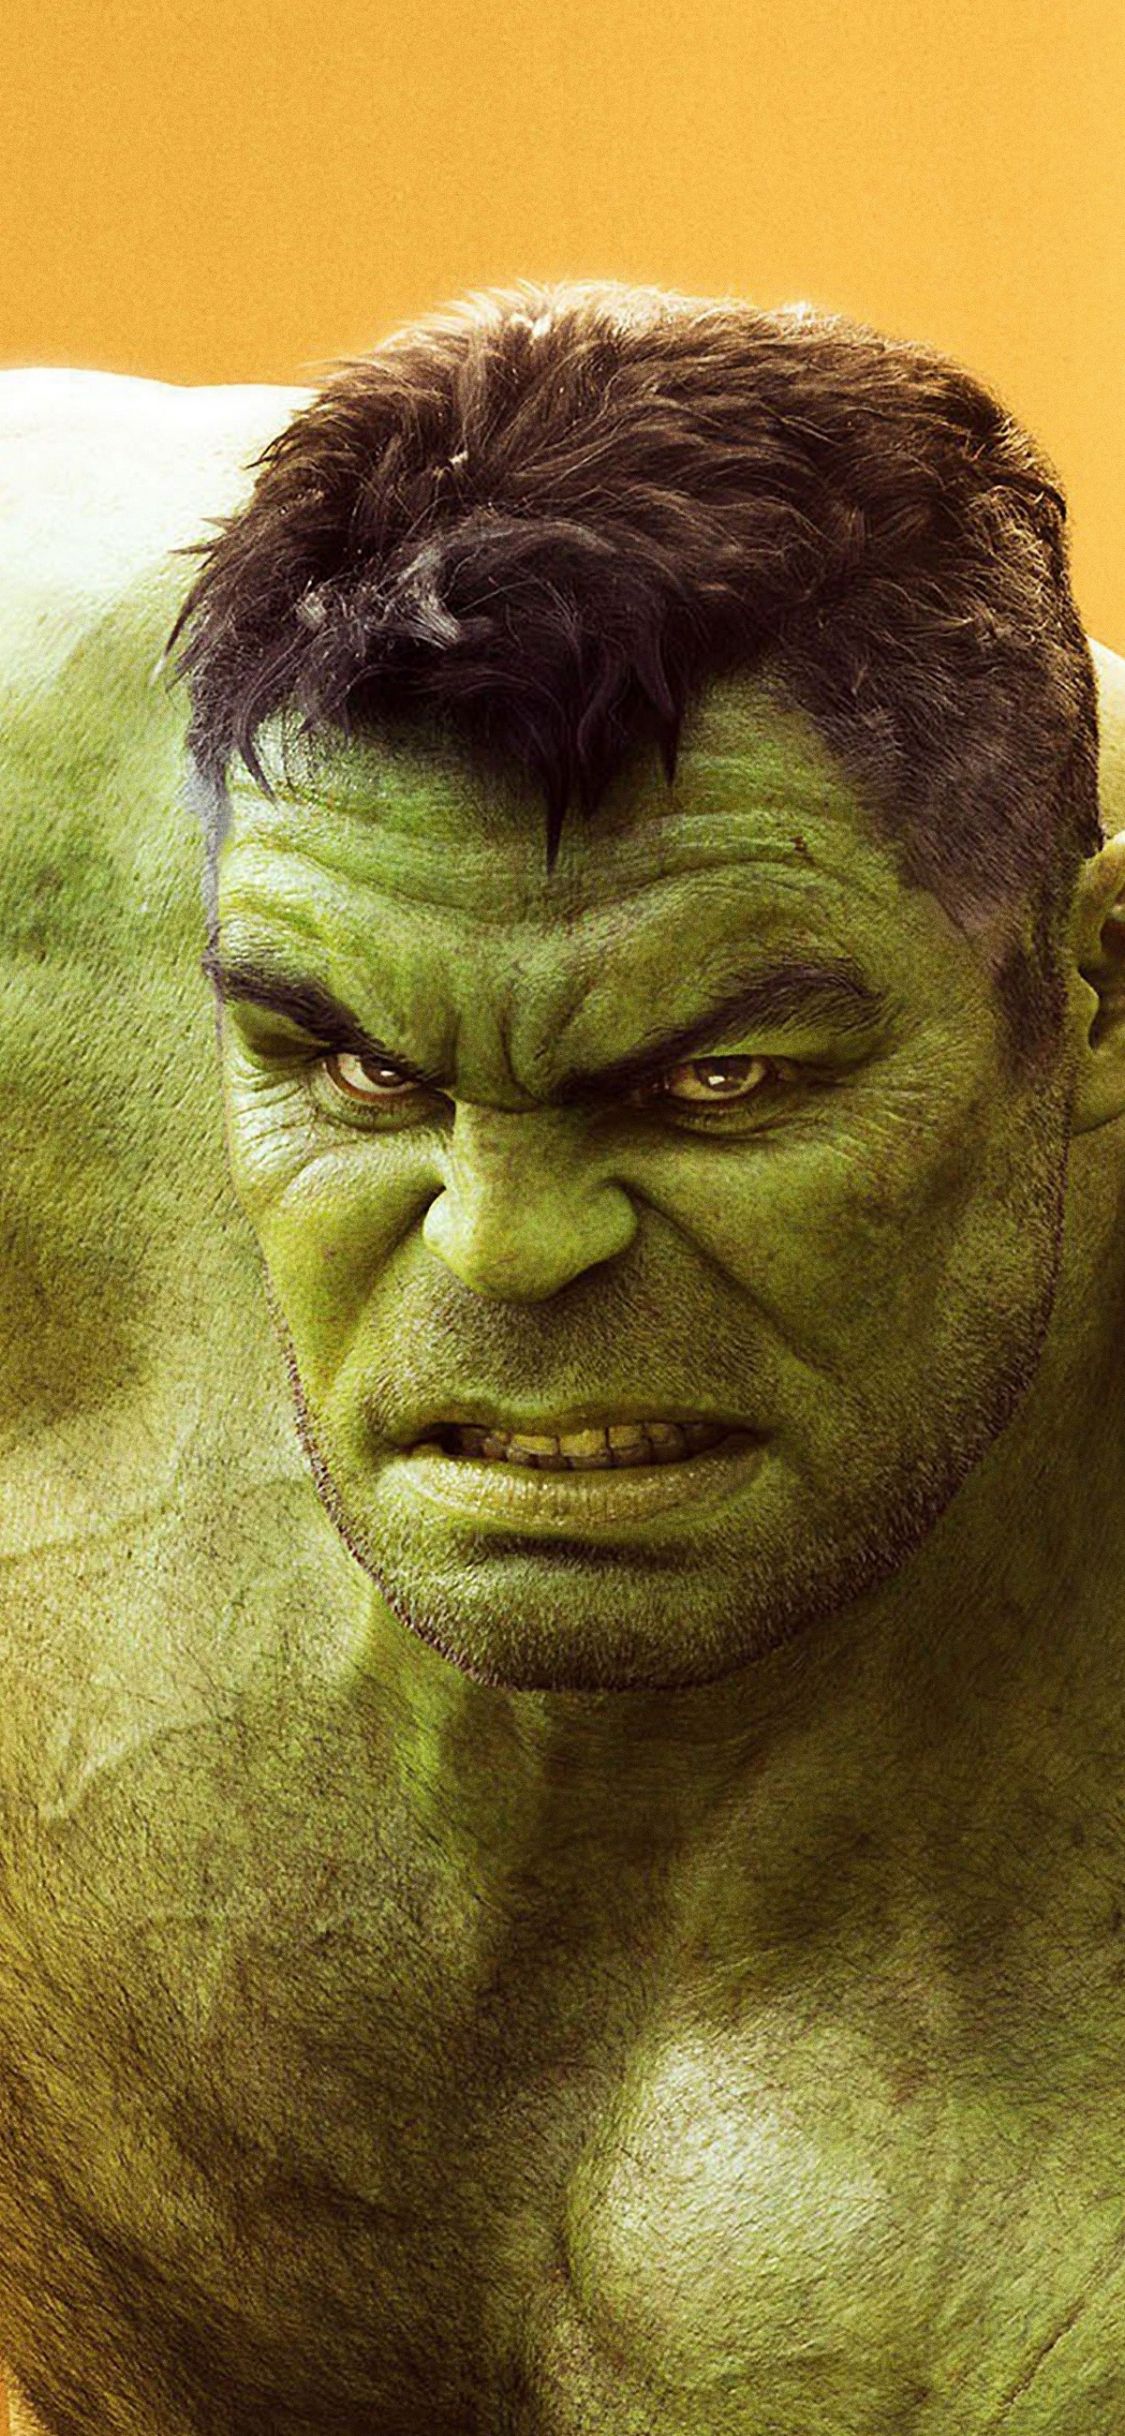 Download 1125x2436 wallpaper hulk, marvel, avengers: infinity war, angry, iphone x 1125x2436 HD image, background, 14883